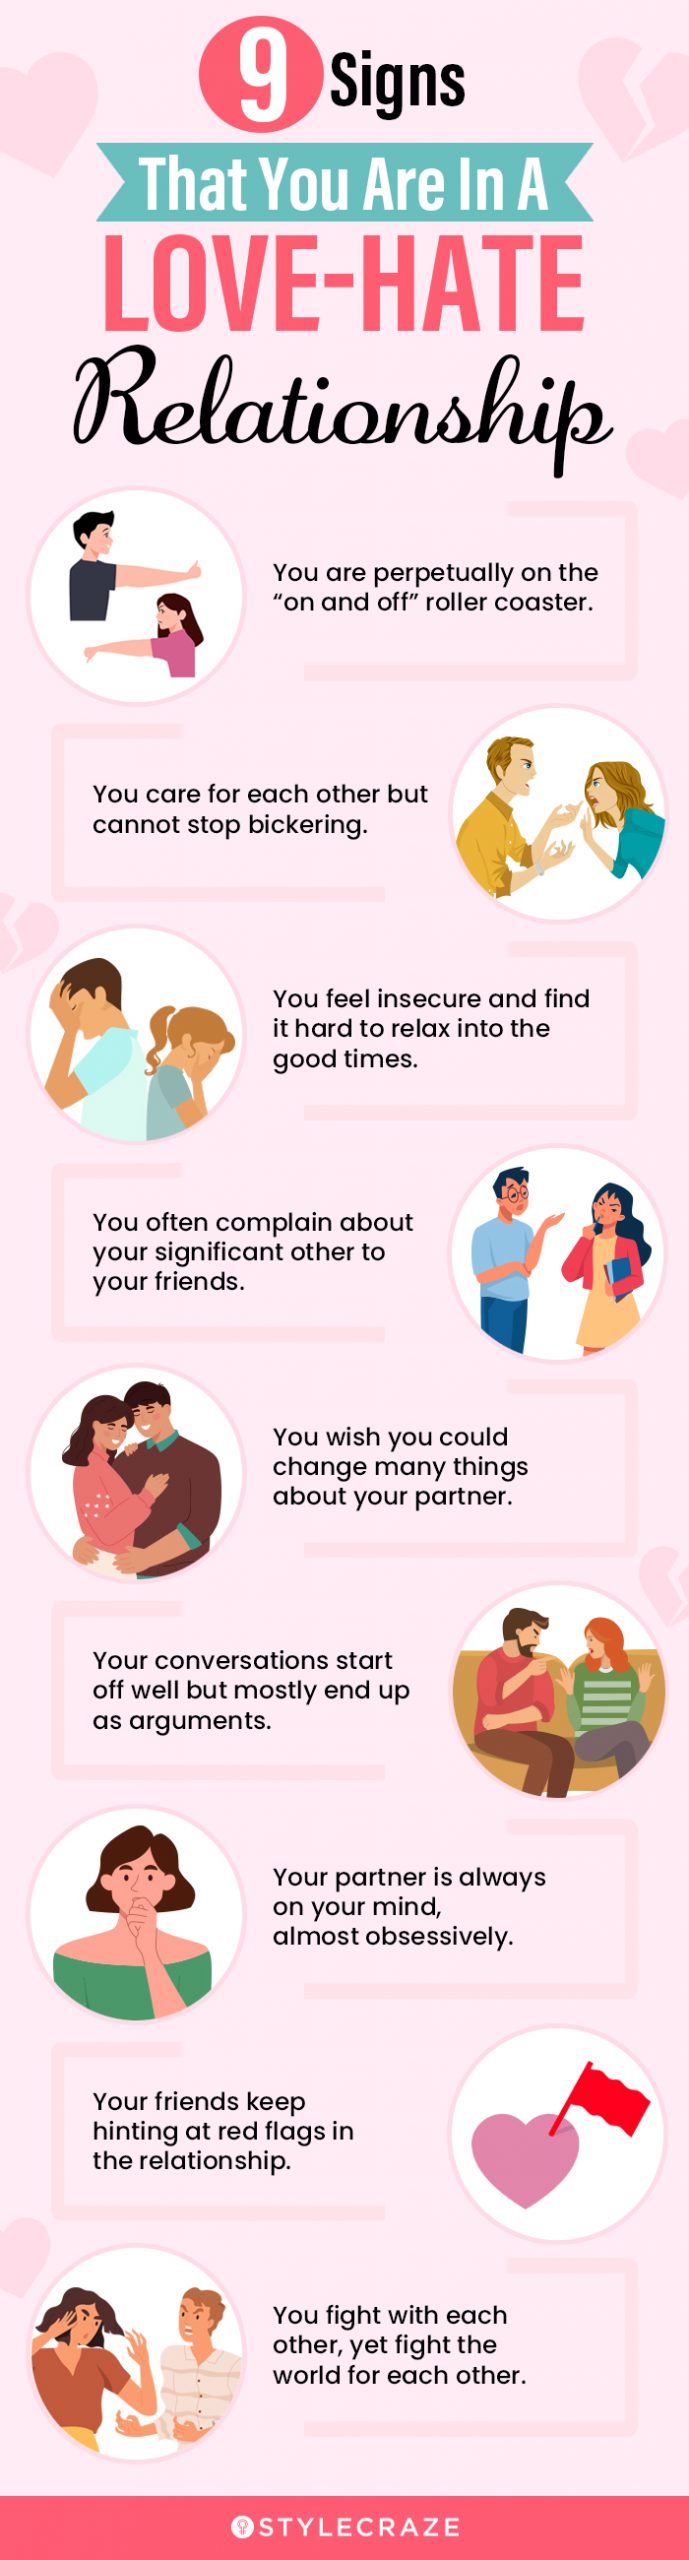 9 signs that you are in a love-hate releationship (infographic)